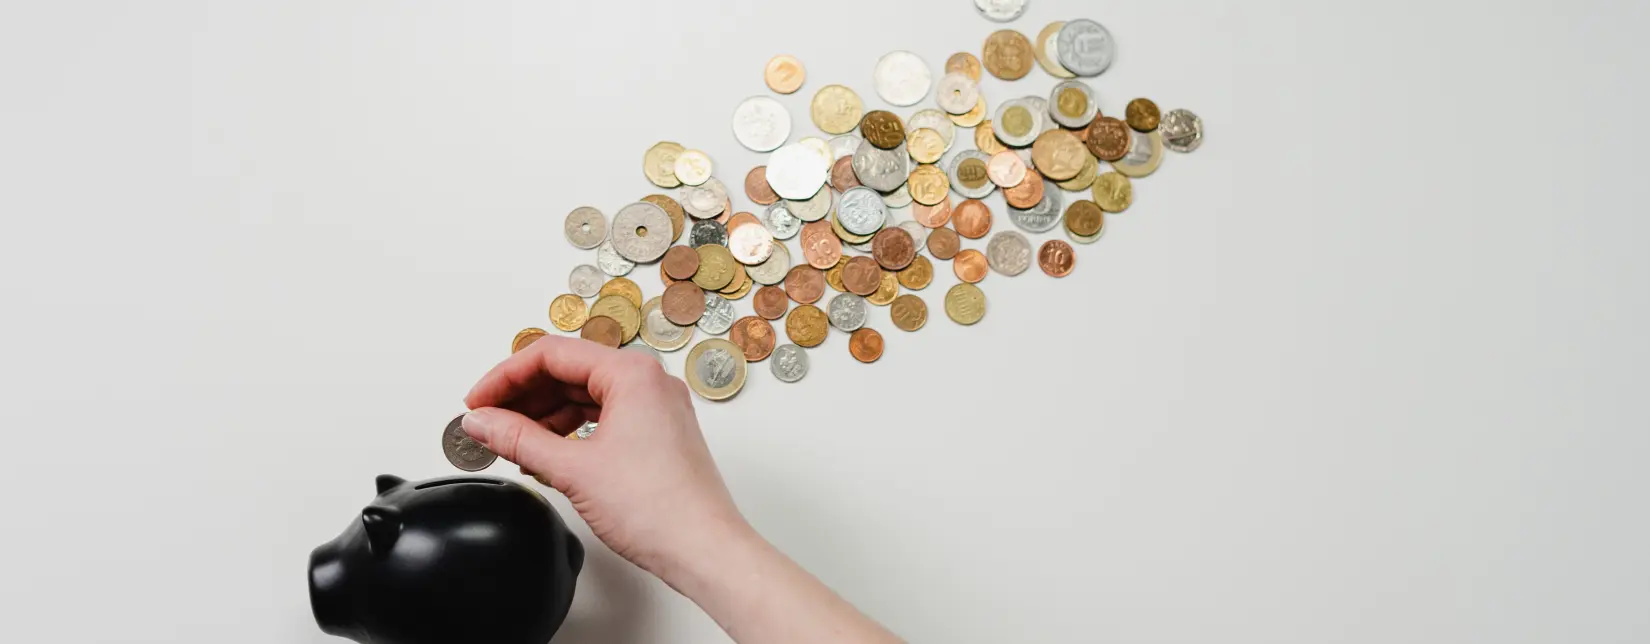 Coins are put into a piggy bank